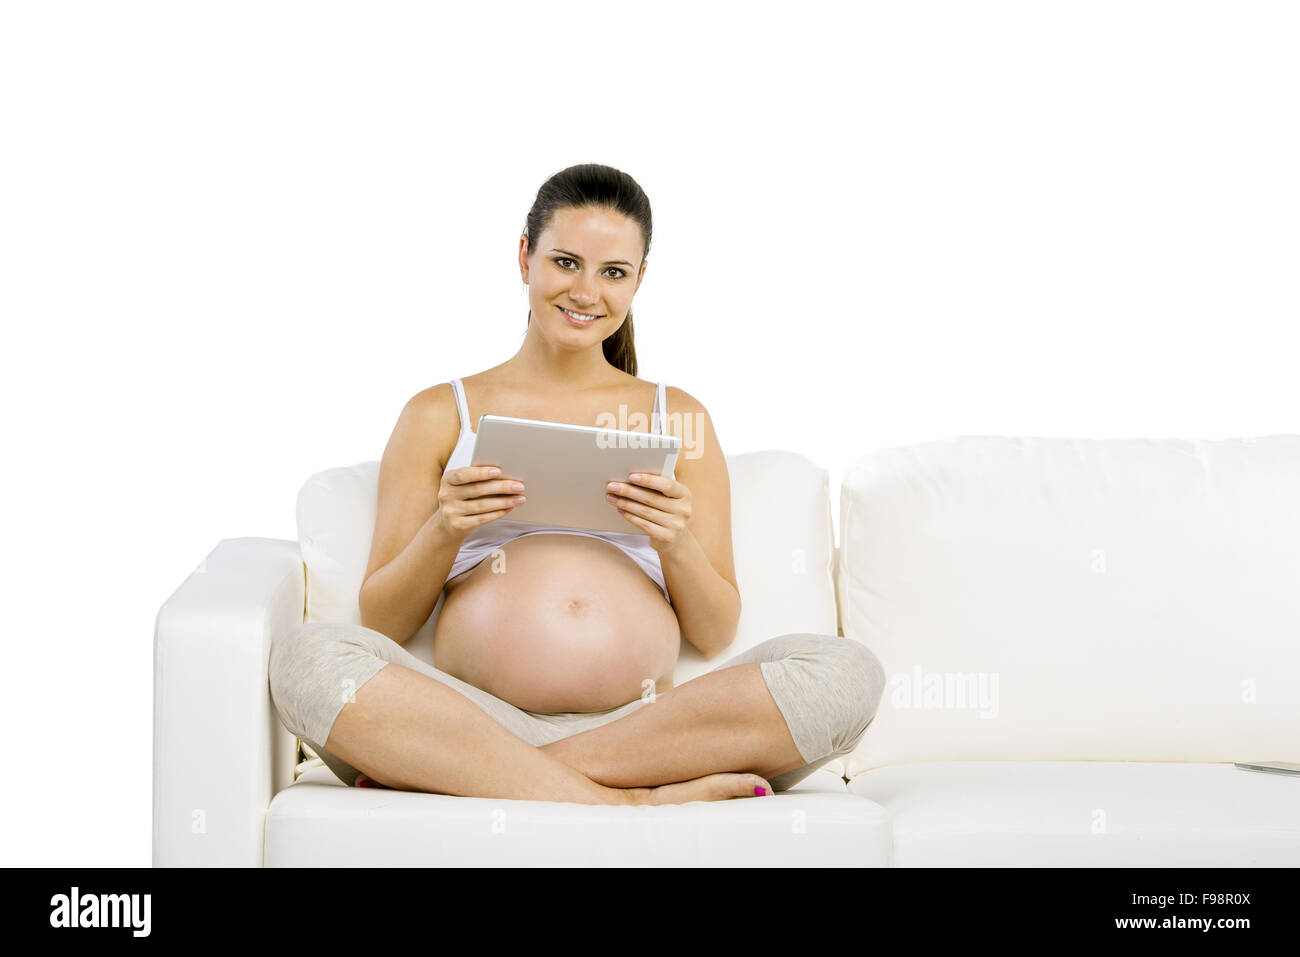 Studio portrait of pregnant woman with digital tablet sitting on sofa isolated on white background Stock Photo